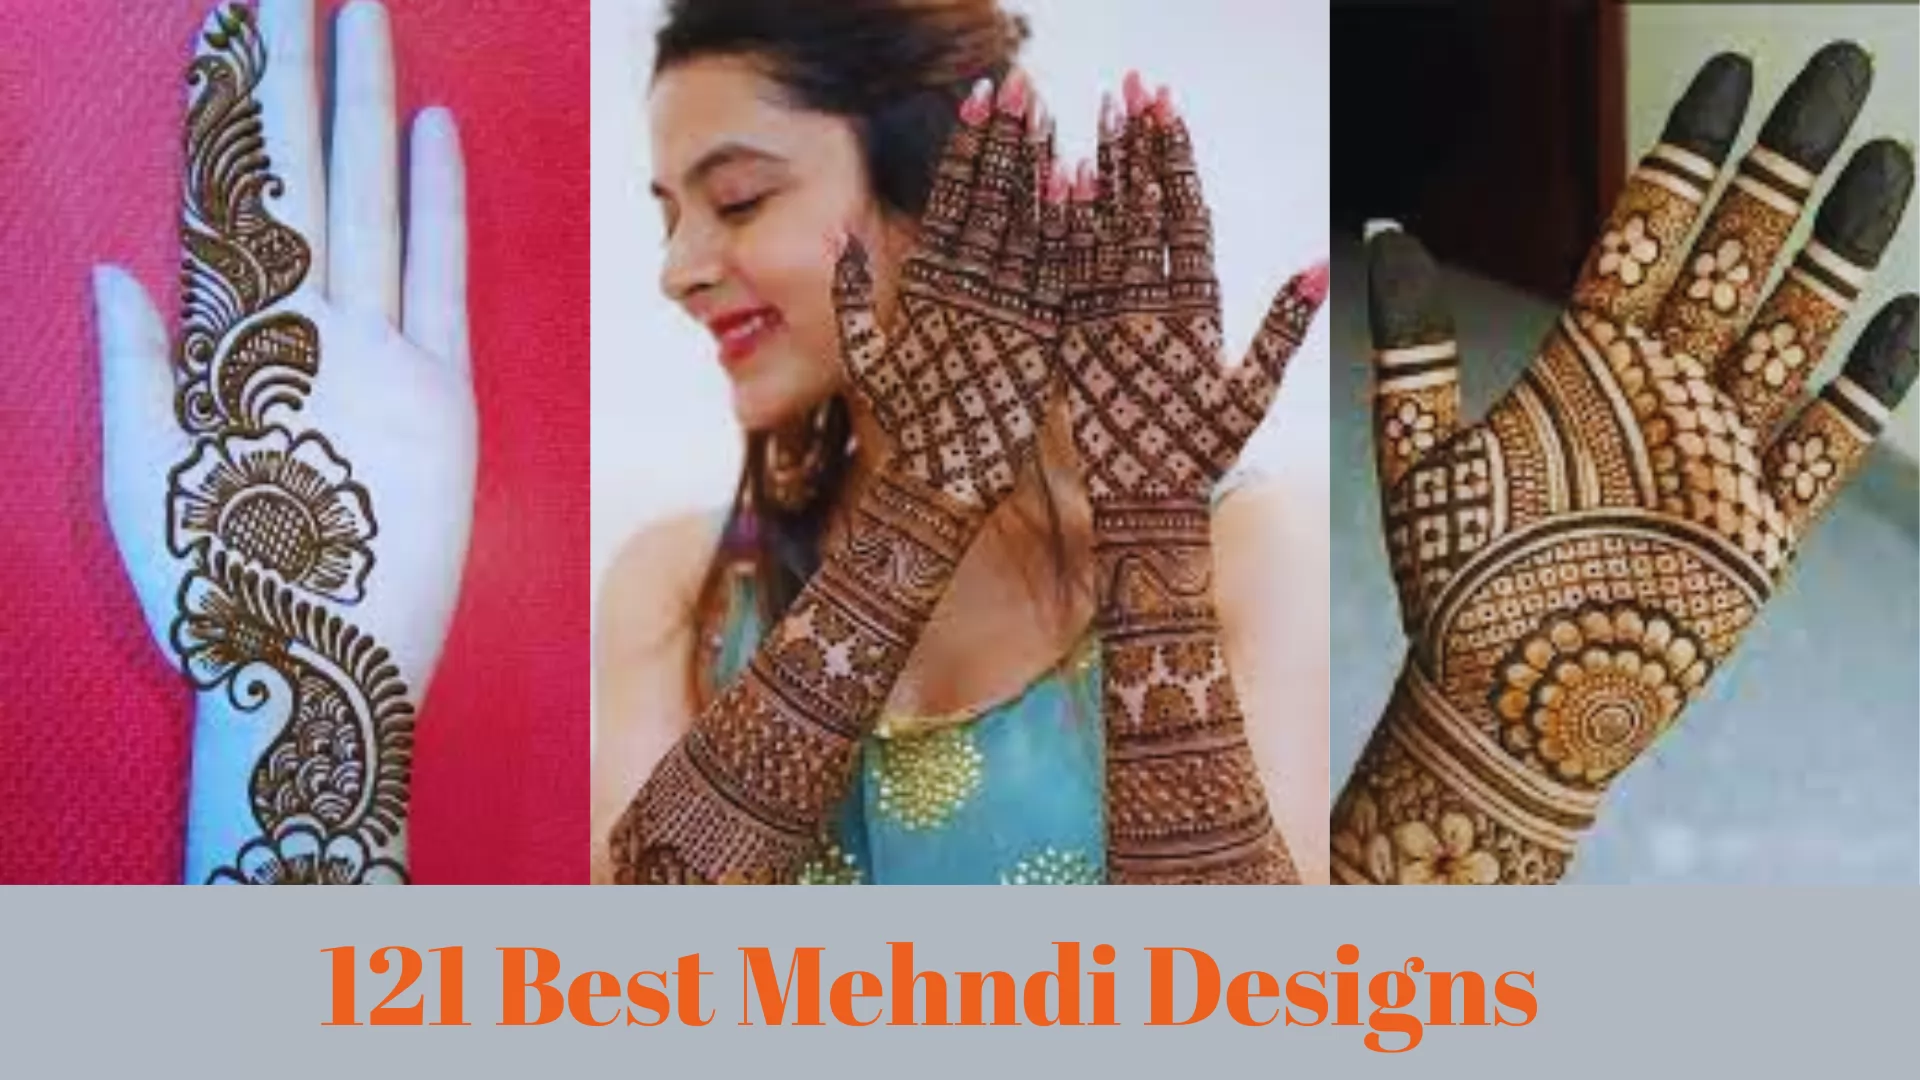 Best Mehndi Designs Images | Henna Designs Images - Mixing Images